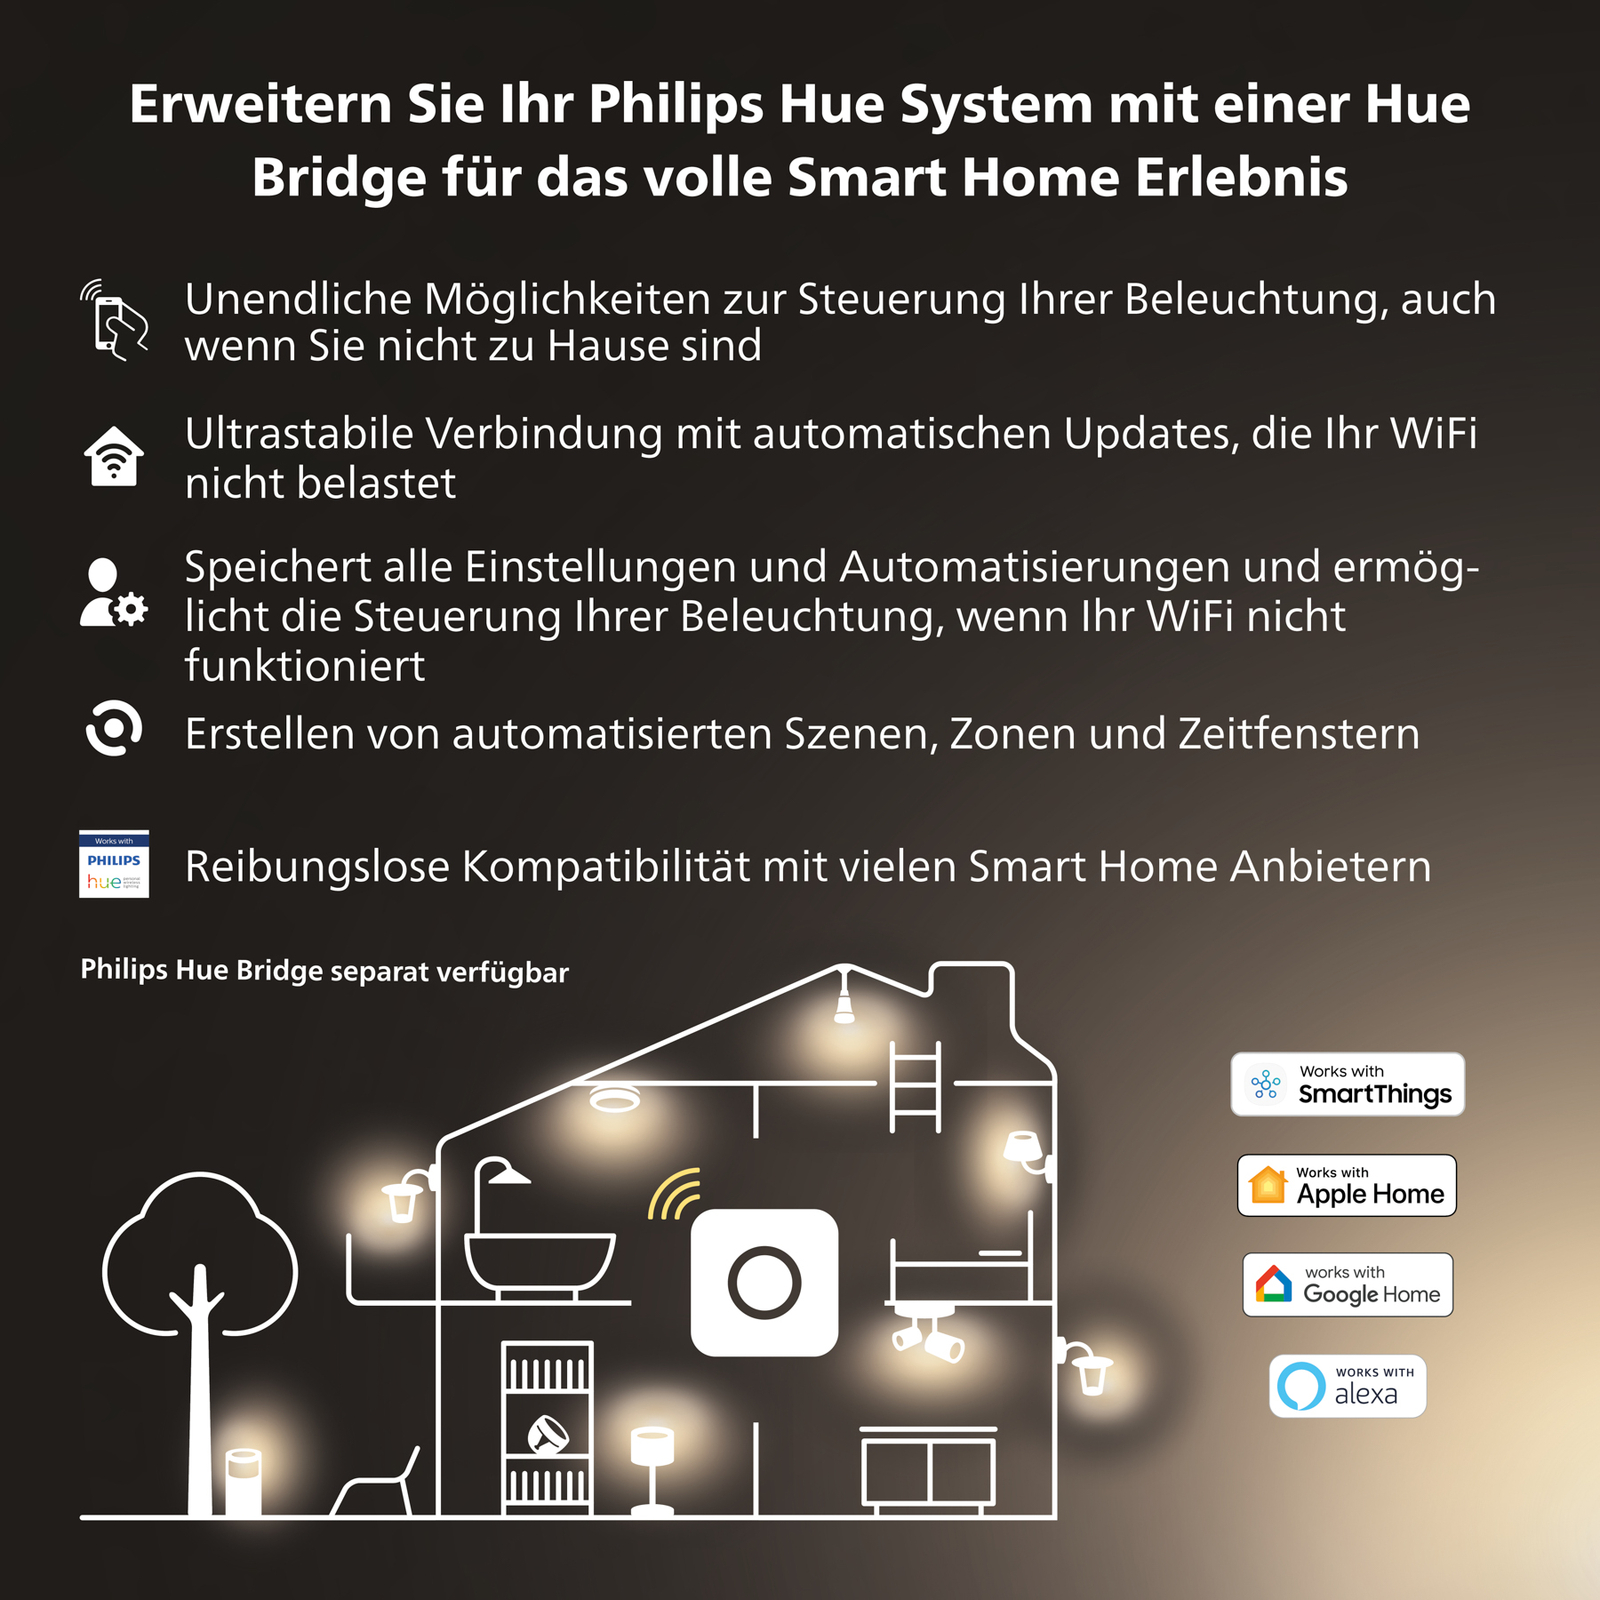 Philips Hue White Ambiance 6 W 800 lm E27 4-pack